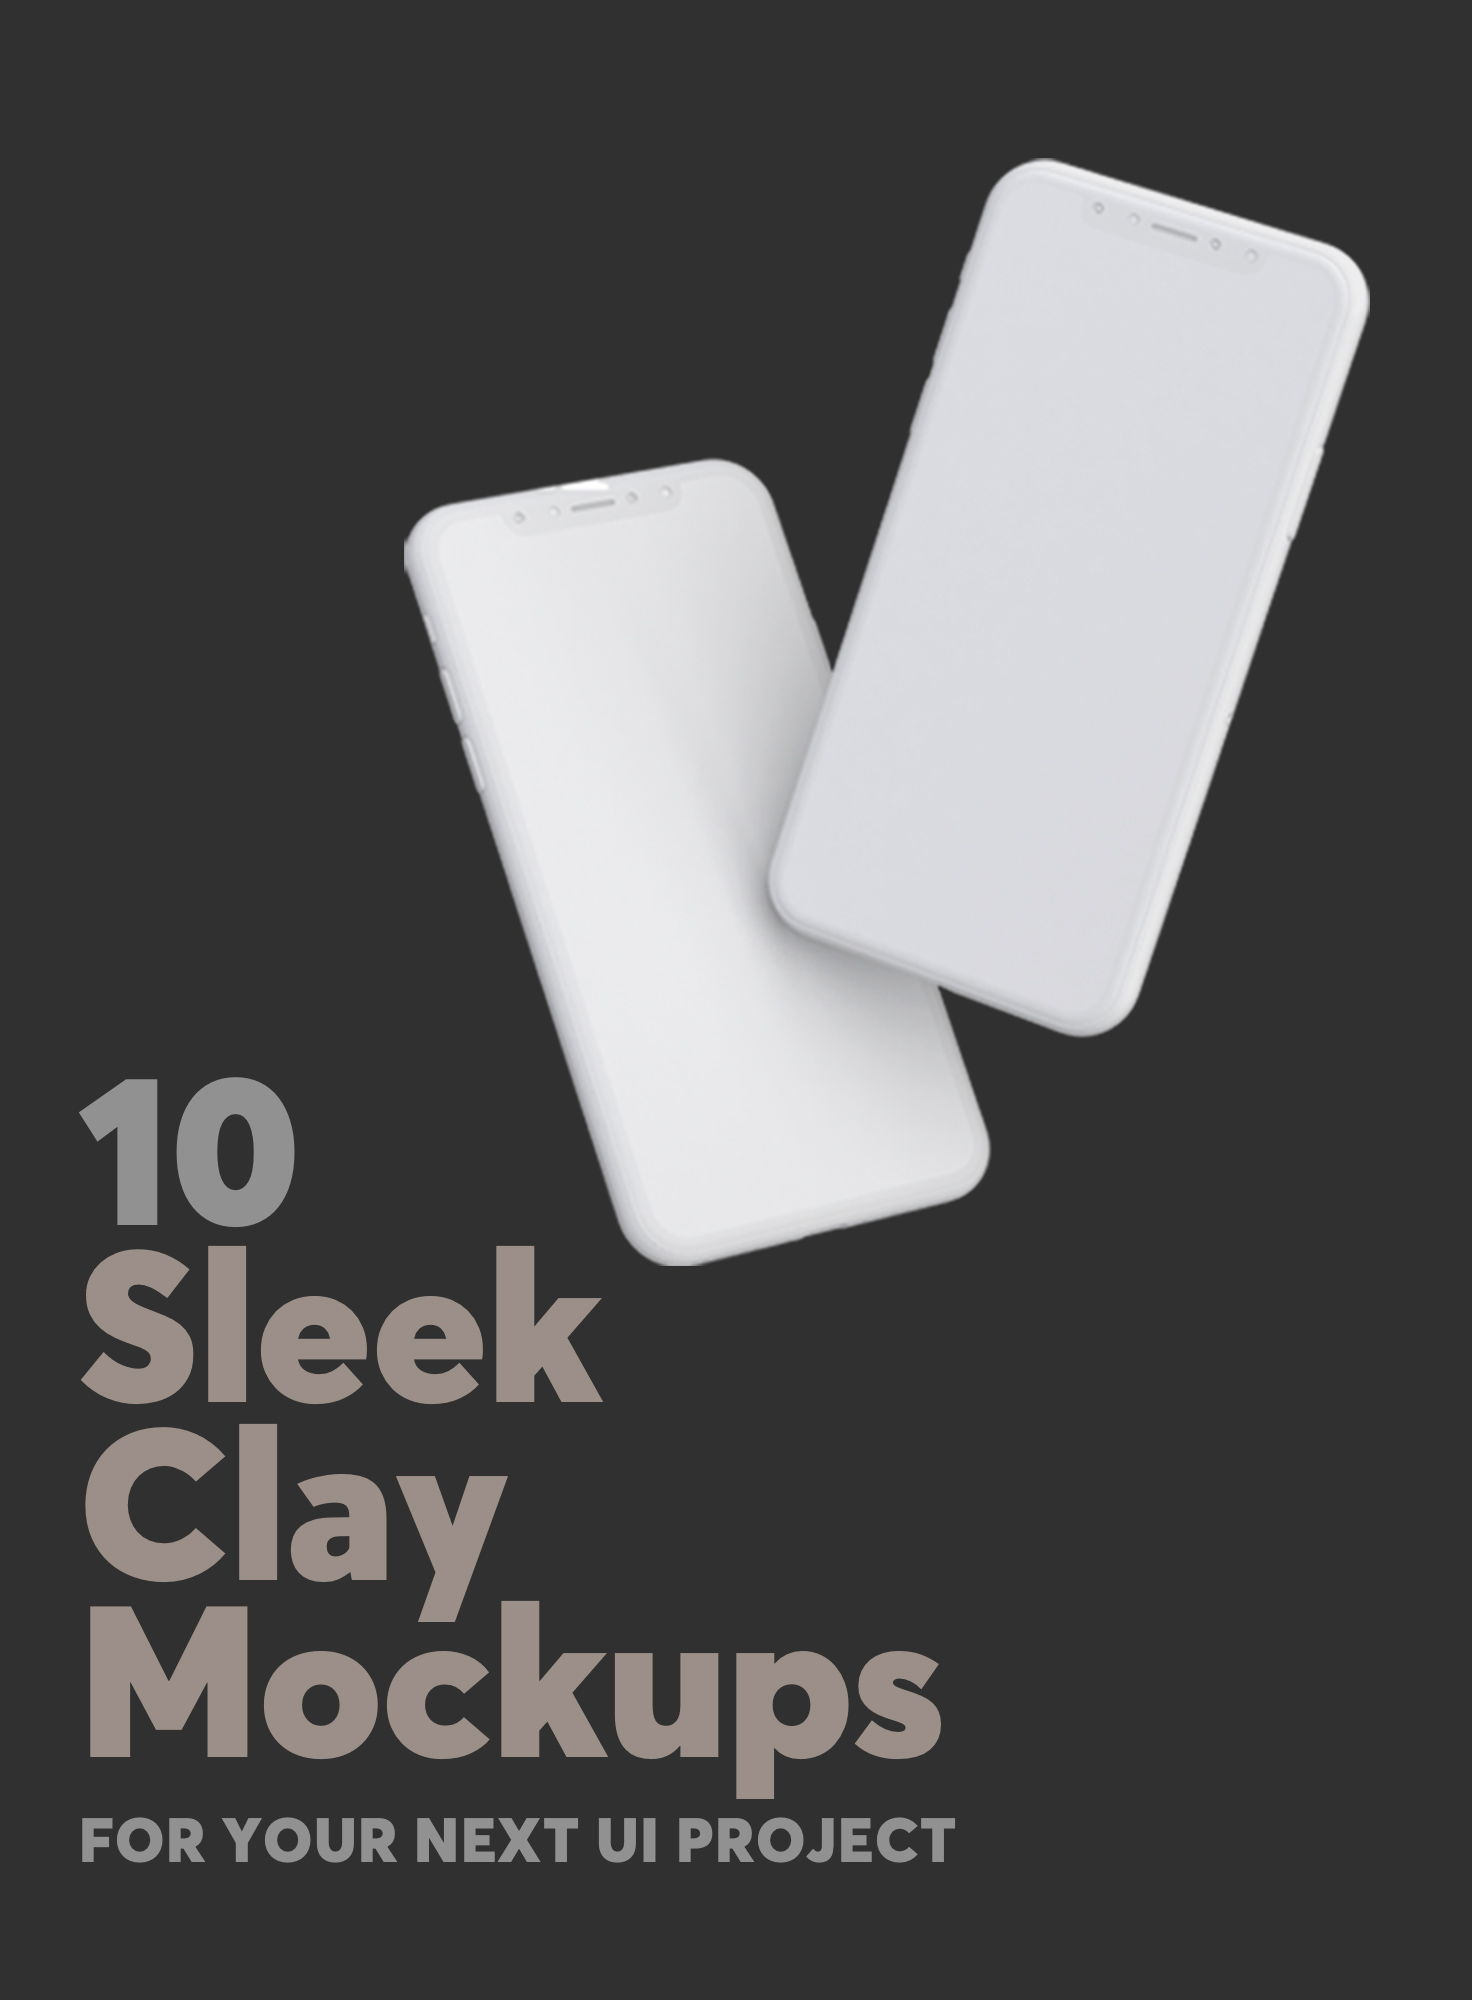 Download 15 Sleek Clay Mockups For Your Next Ui Project Creative Market Blog